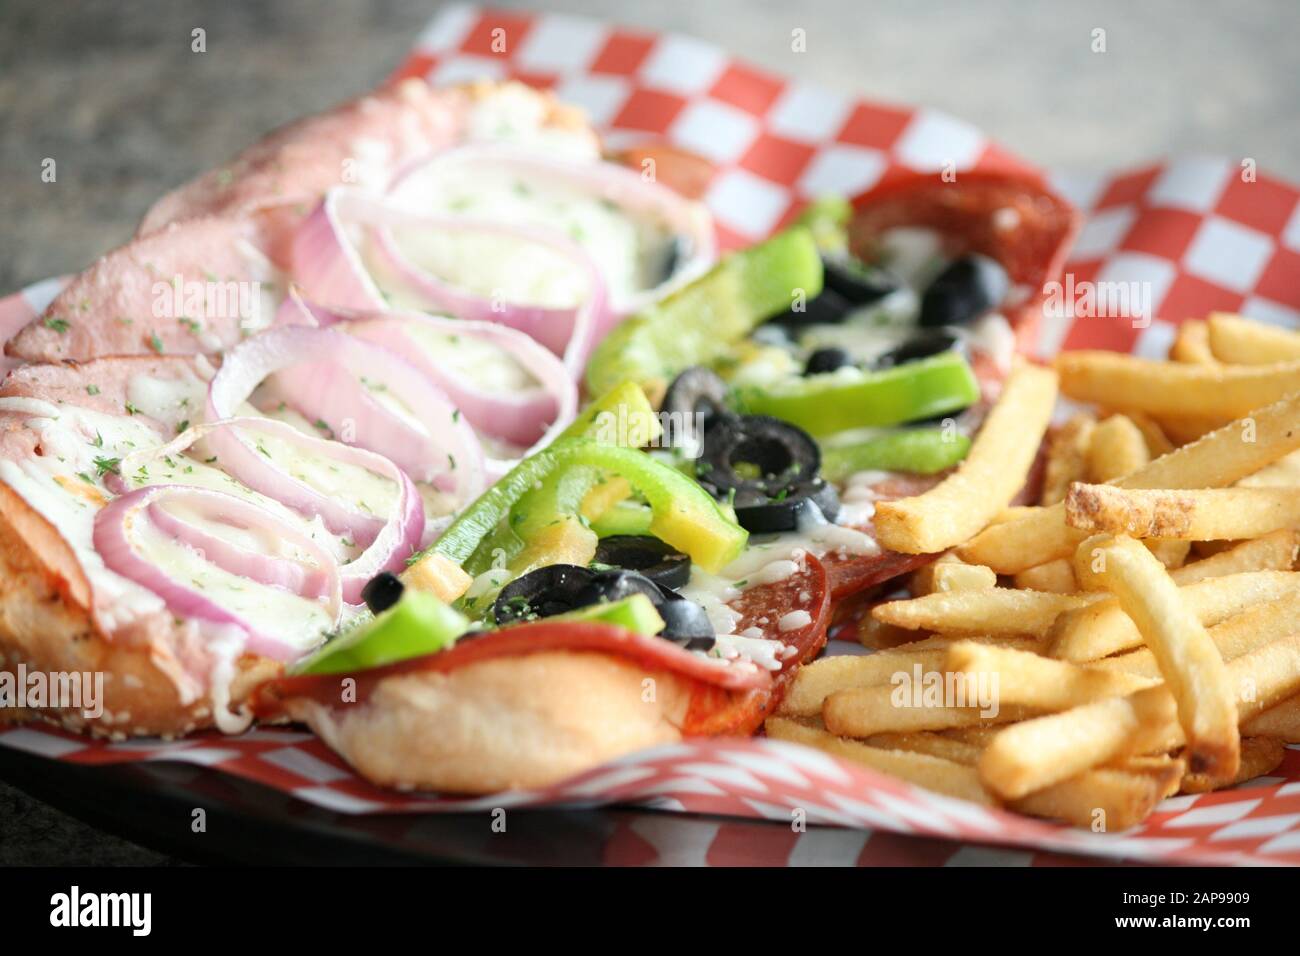 toasted open faced deli sandwich with green peppers, black olives, melted mozzarella cheese and french fries on the side pub or deli restaurant food Stock Photo